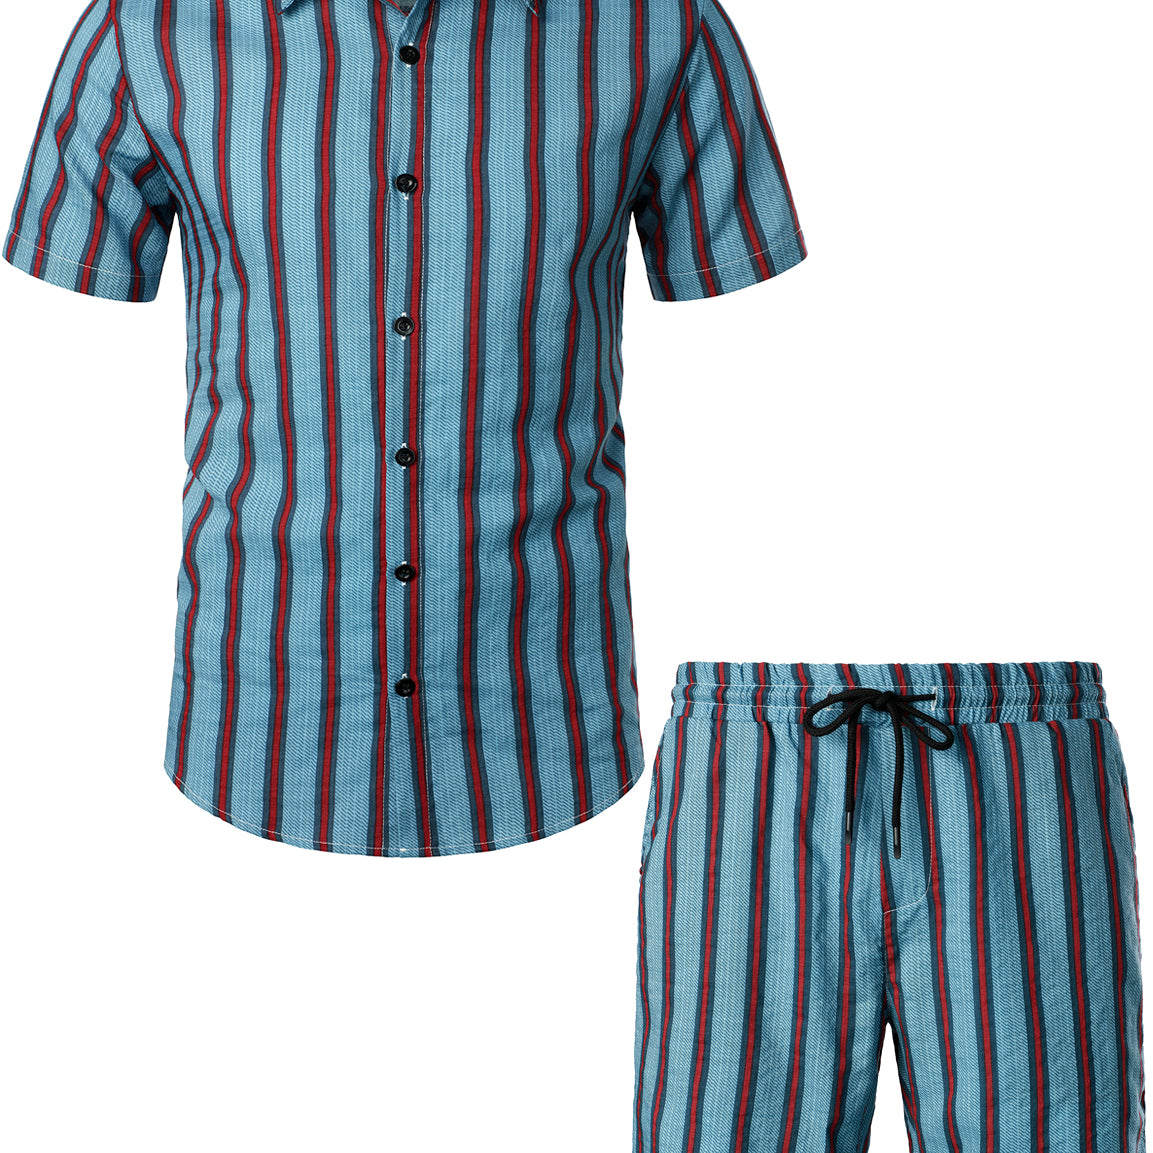 Men's Blue Striped Casual Breathable Cotton Outfit Matching Shirt and Shorts Set